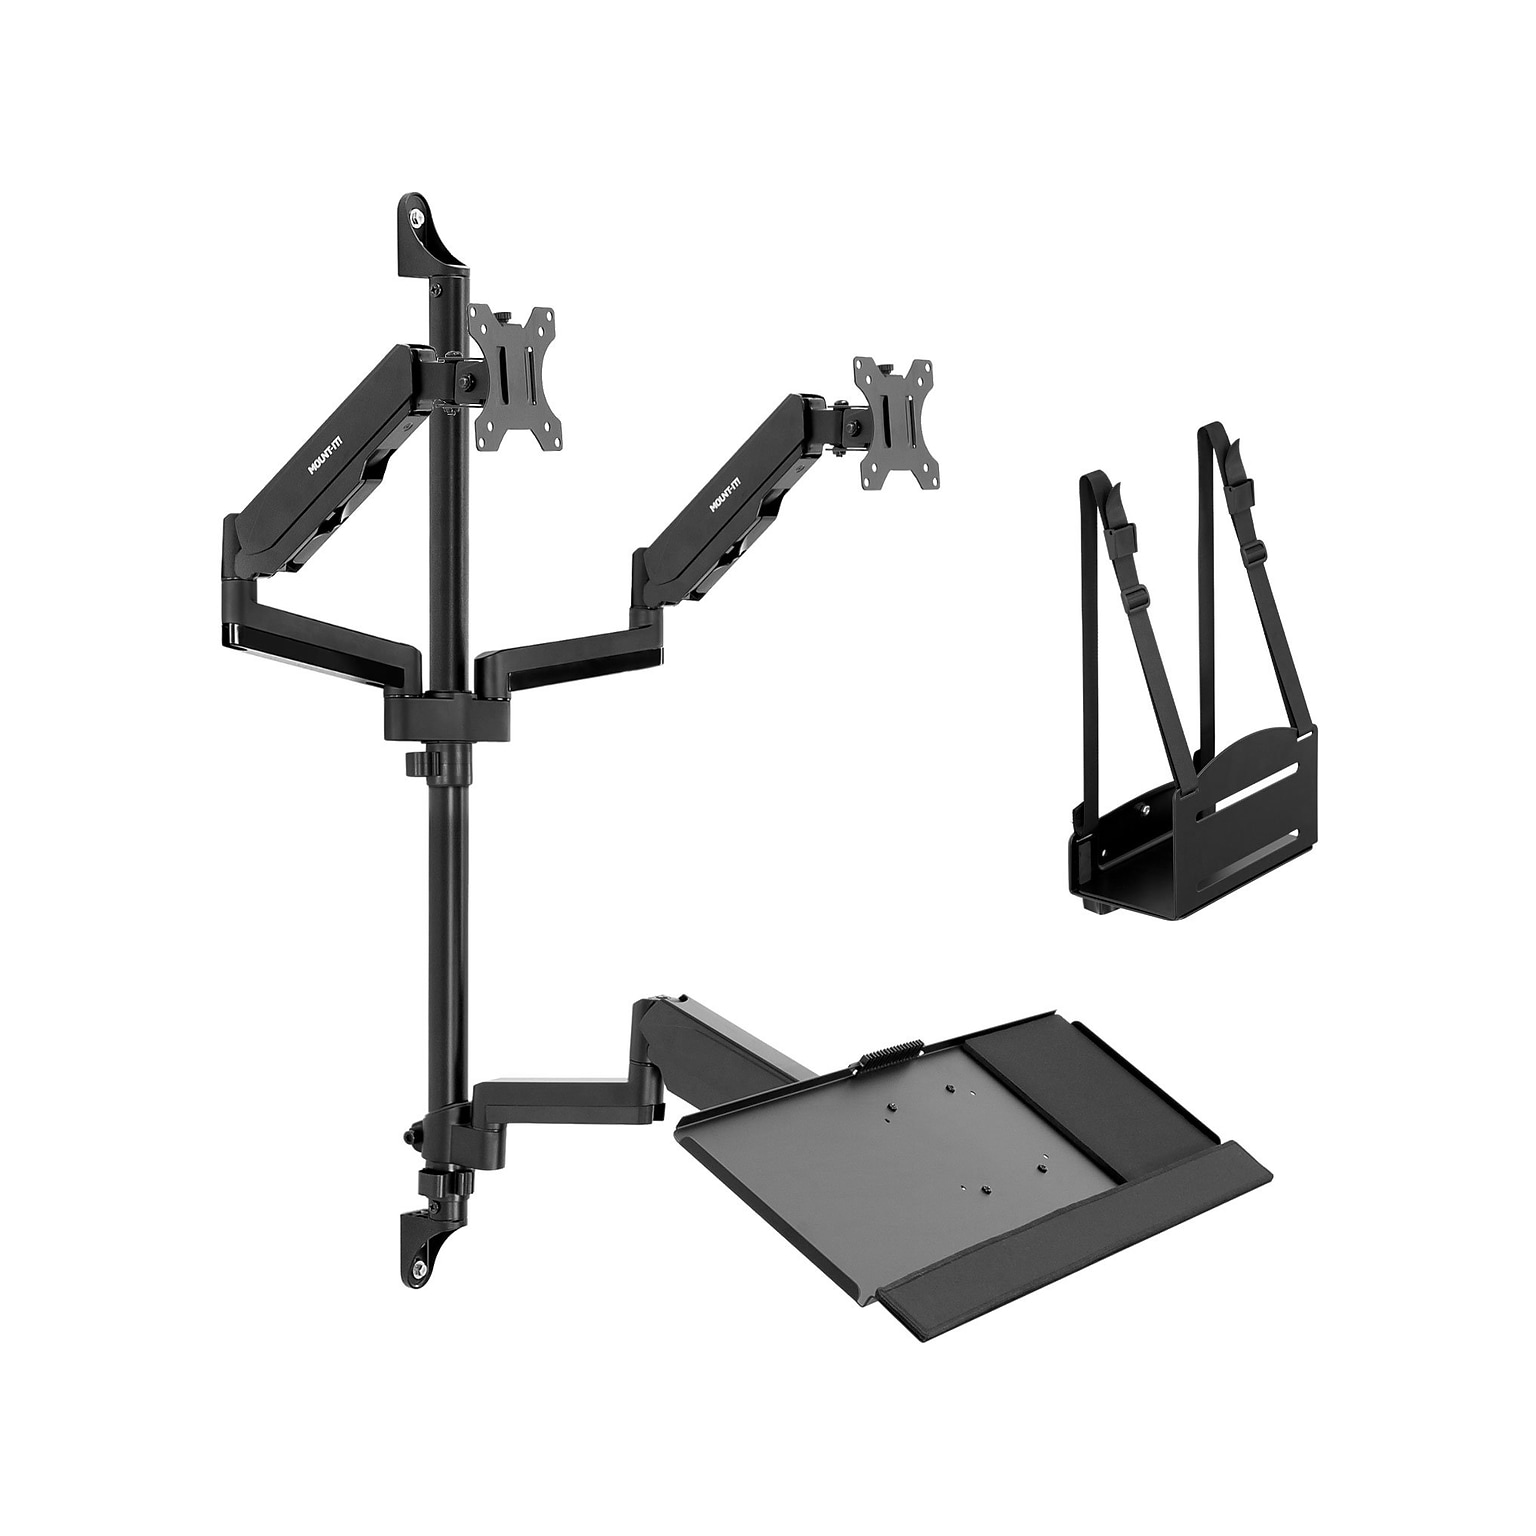 Mount-It! Adjustable Dual-Monitor Wall Mount Workstation, Up to 32, Black (MI-7992)